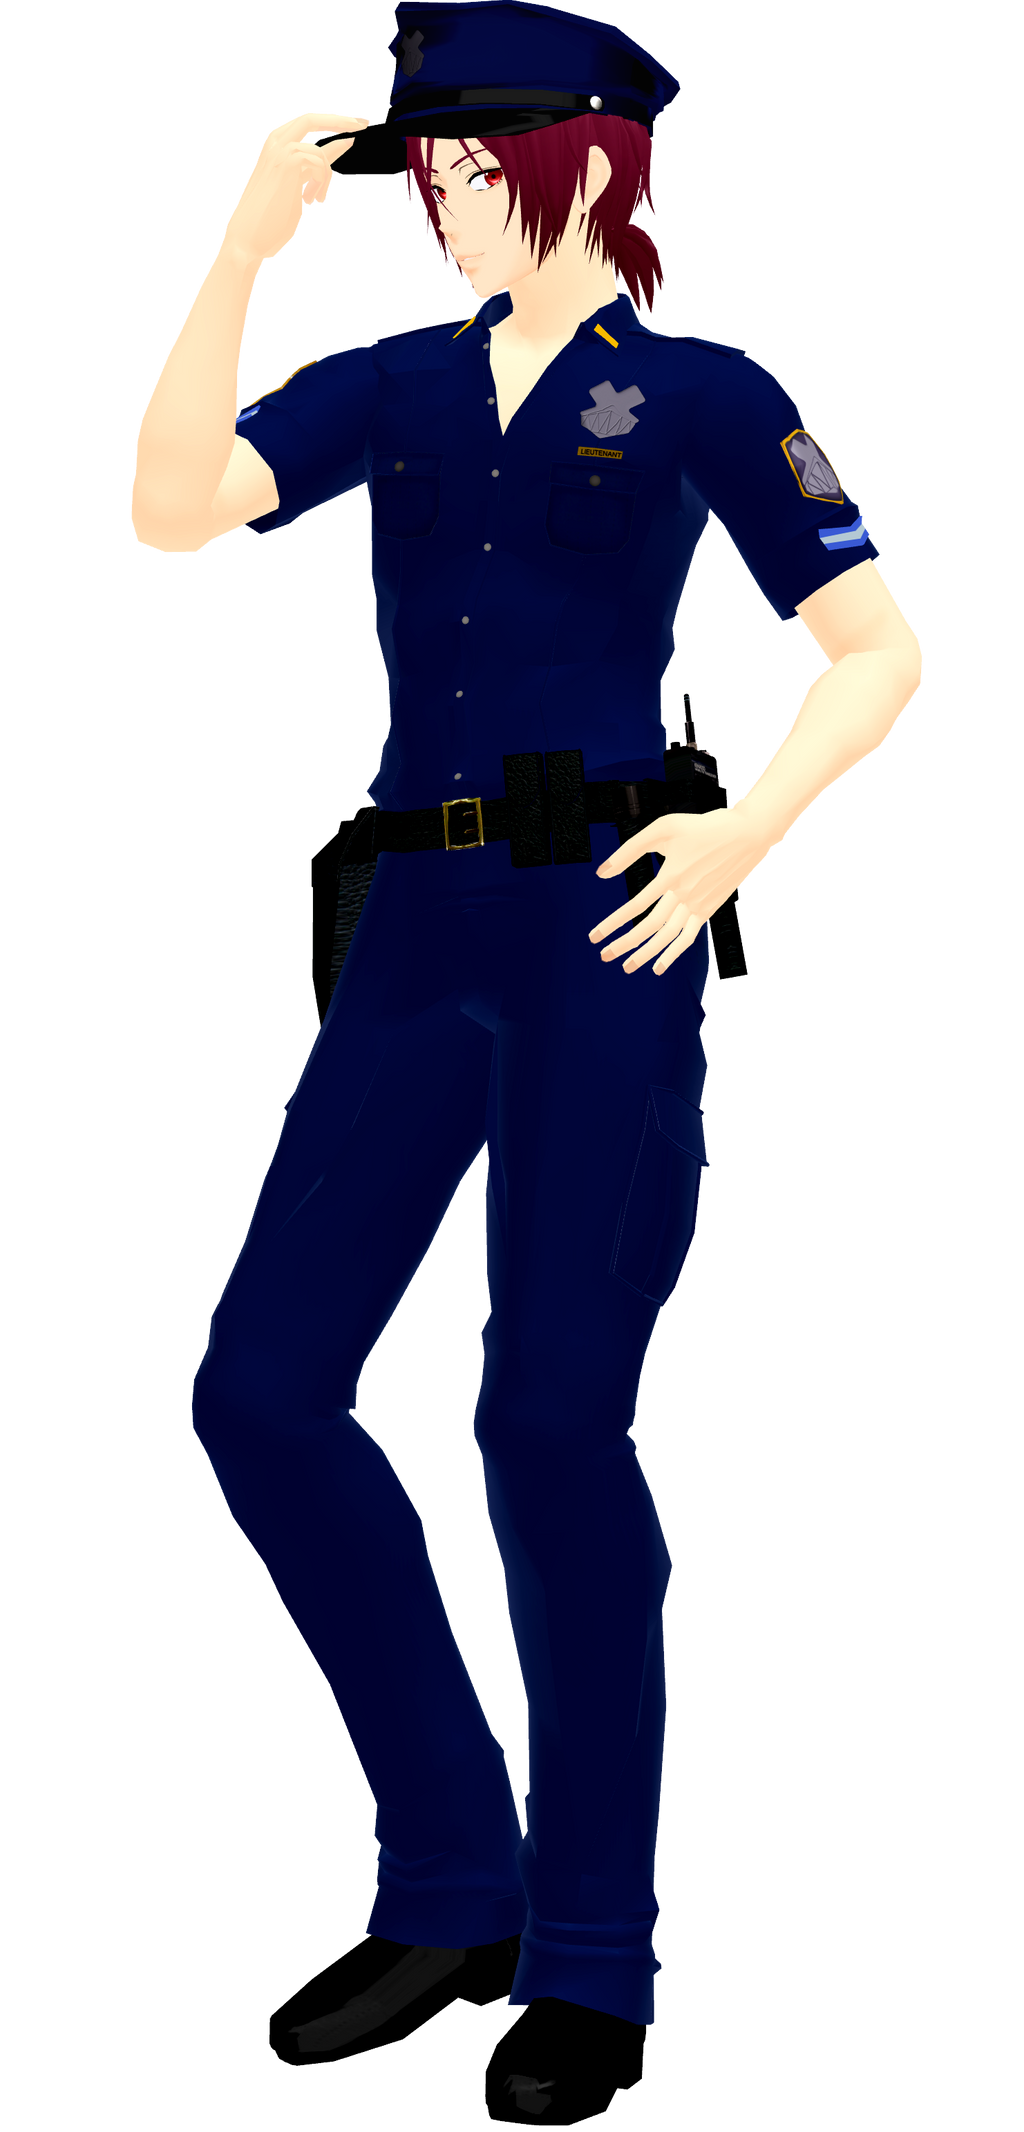 policeman hat clipart - photo #23